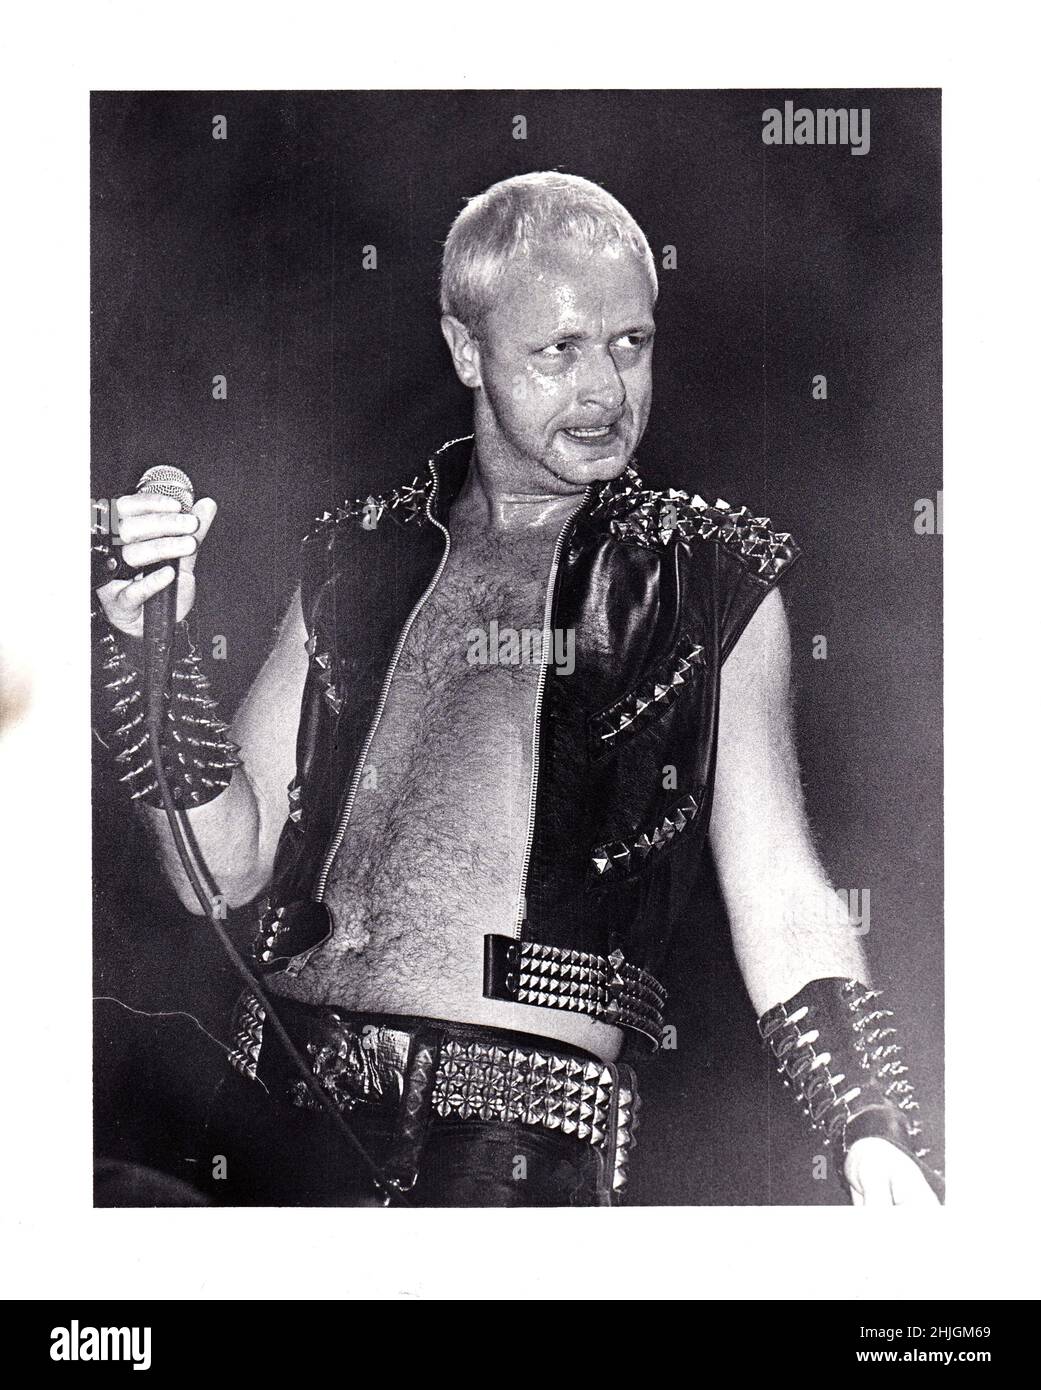 Rob Halford of Judas Priest photographed in 1982 Credit: Ron Wolfson / Rock  Negatives / MediaPunch Stock Photo - Alamy